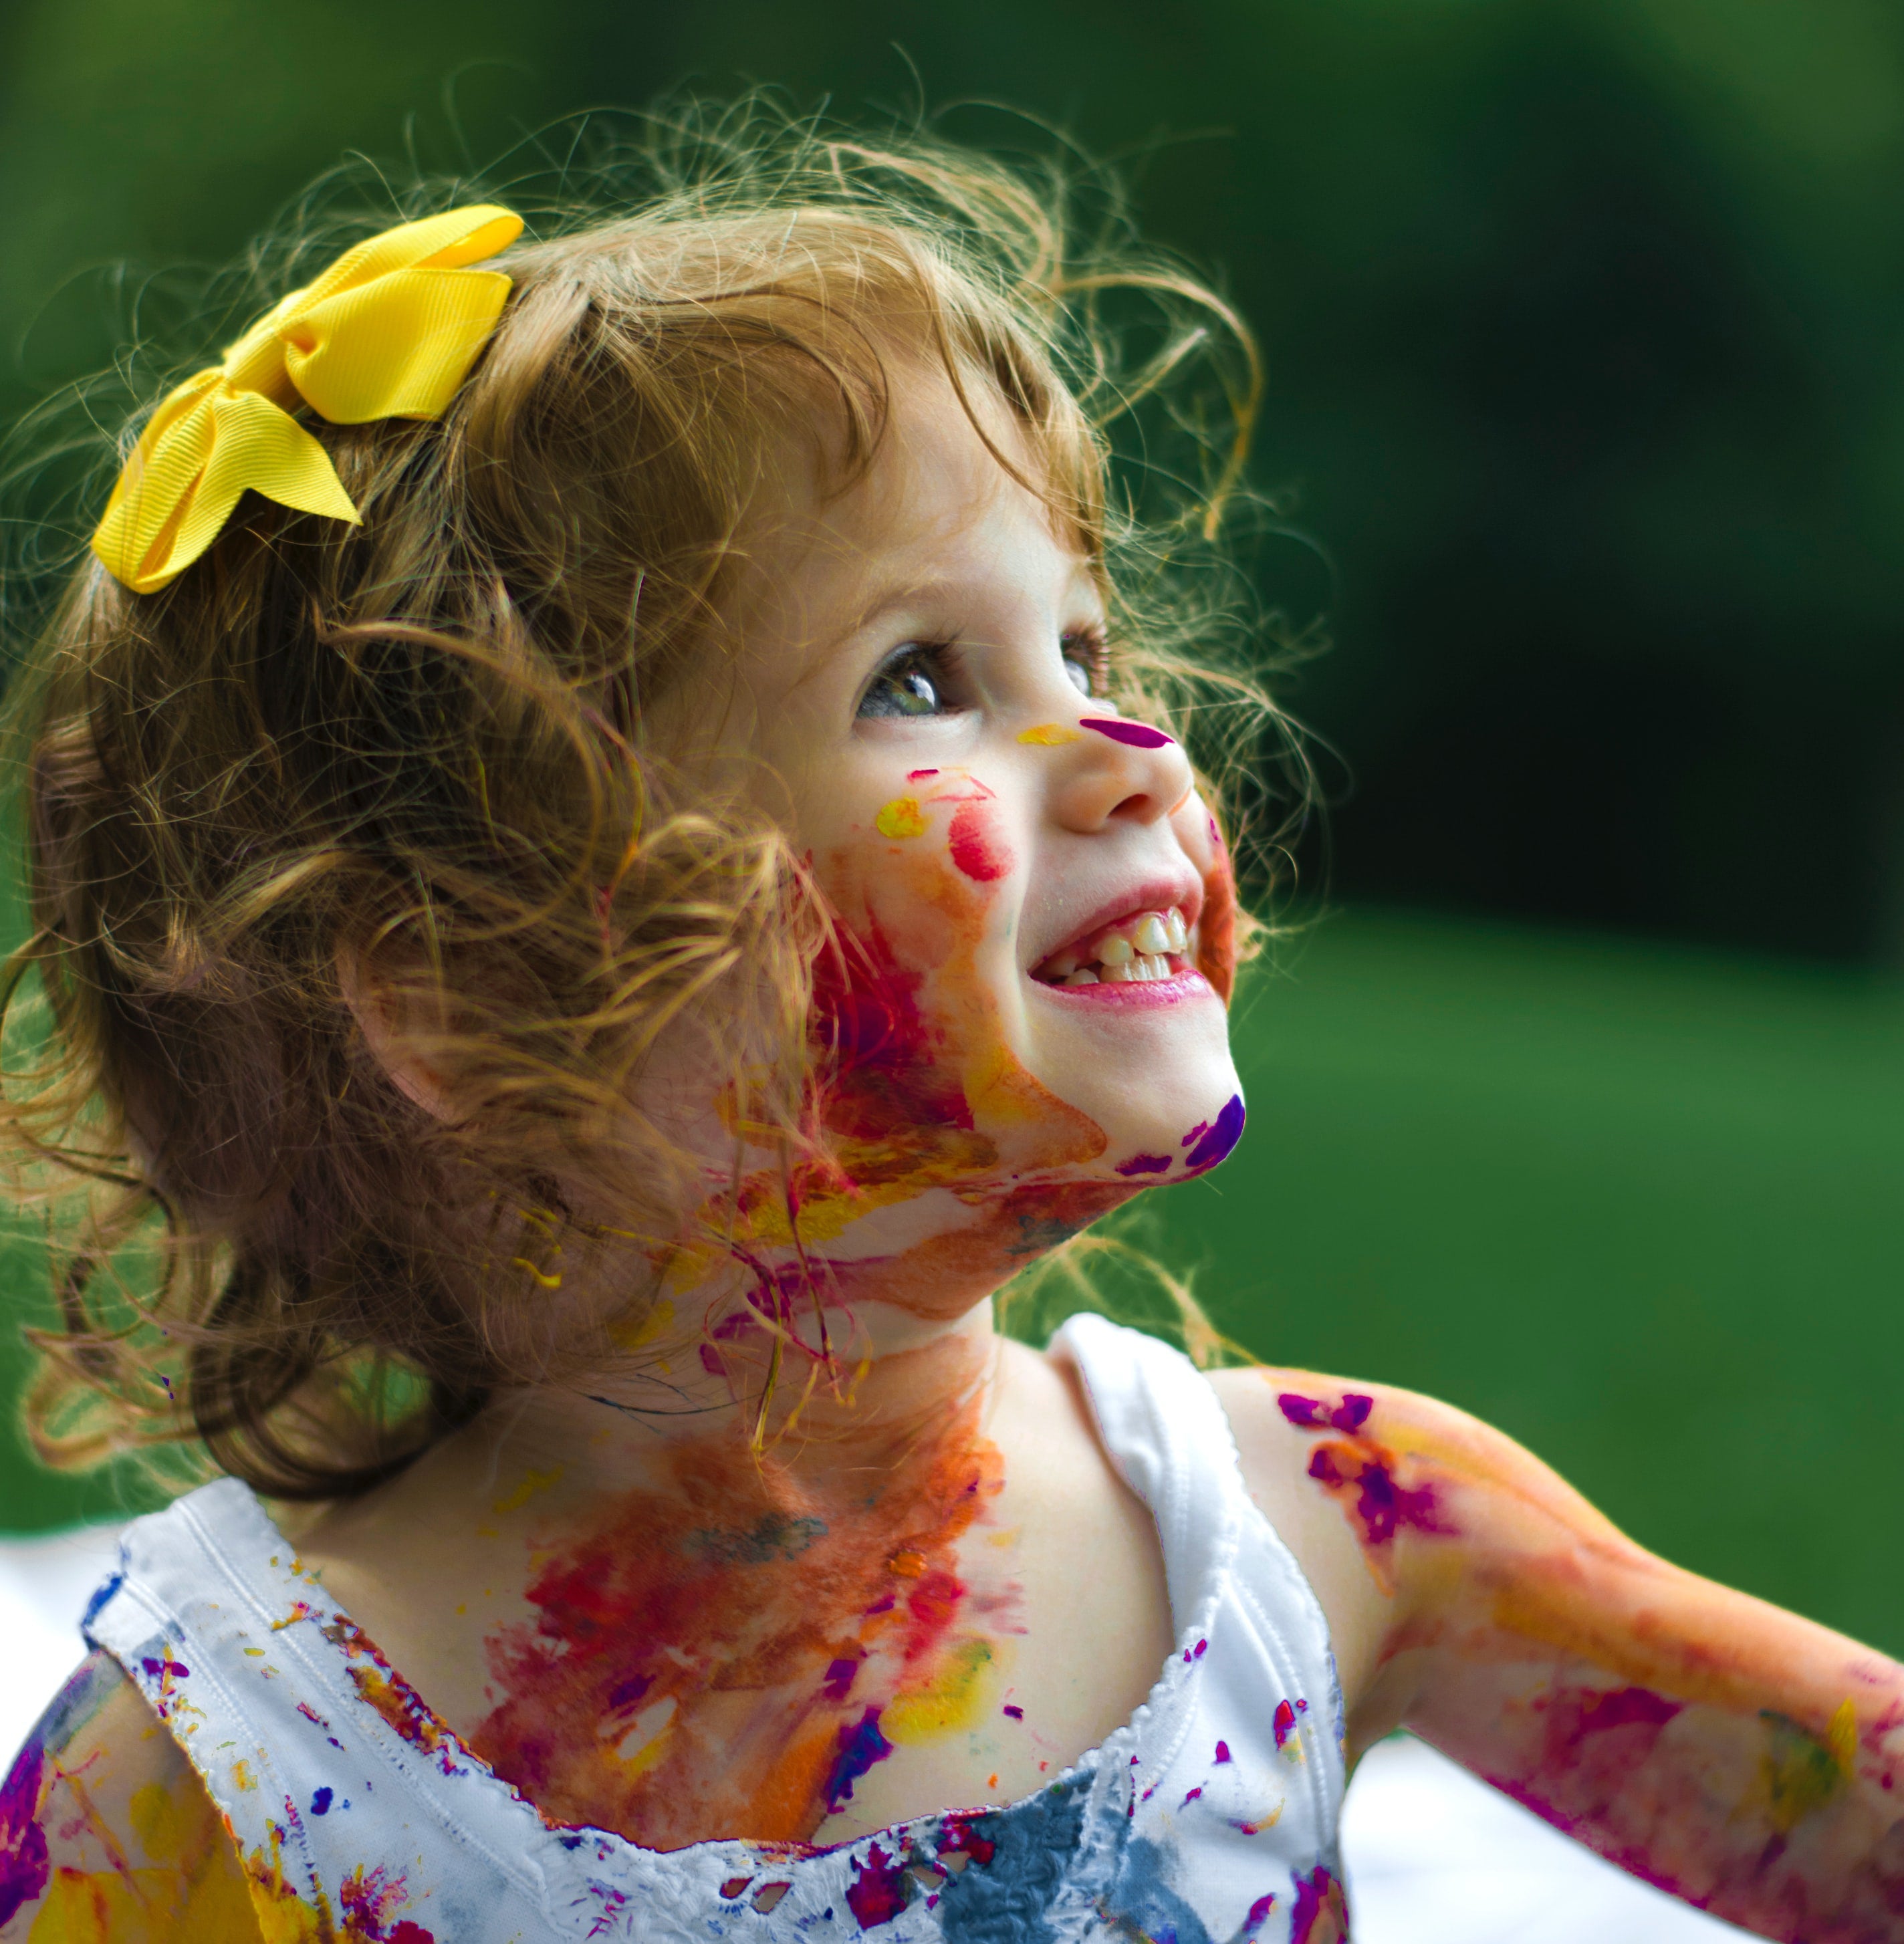 A happy, face-painted child.